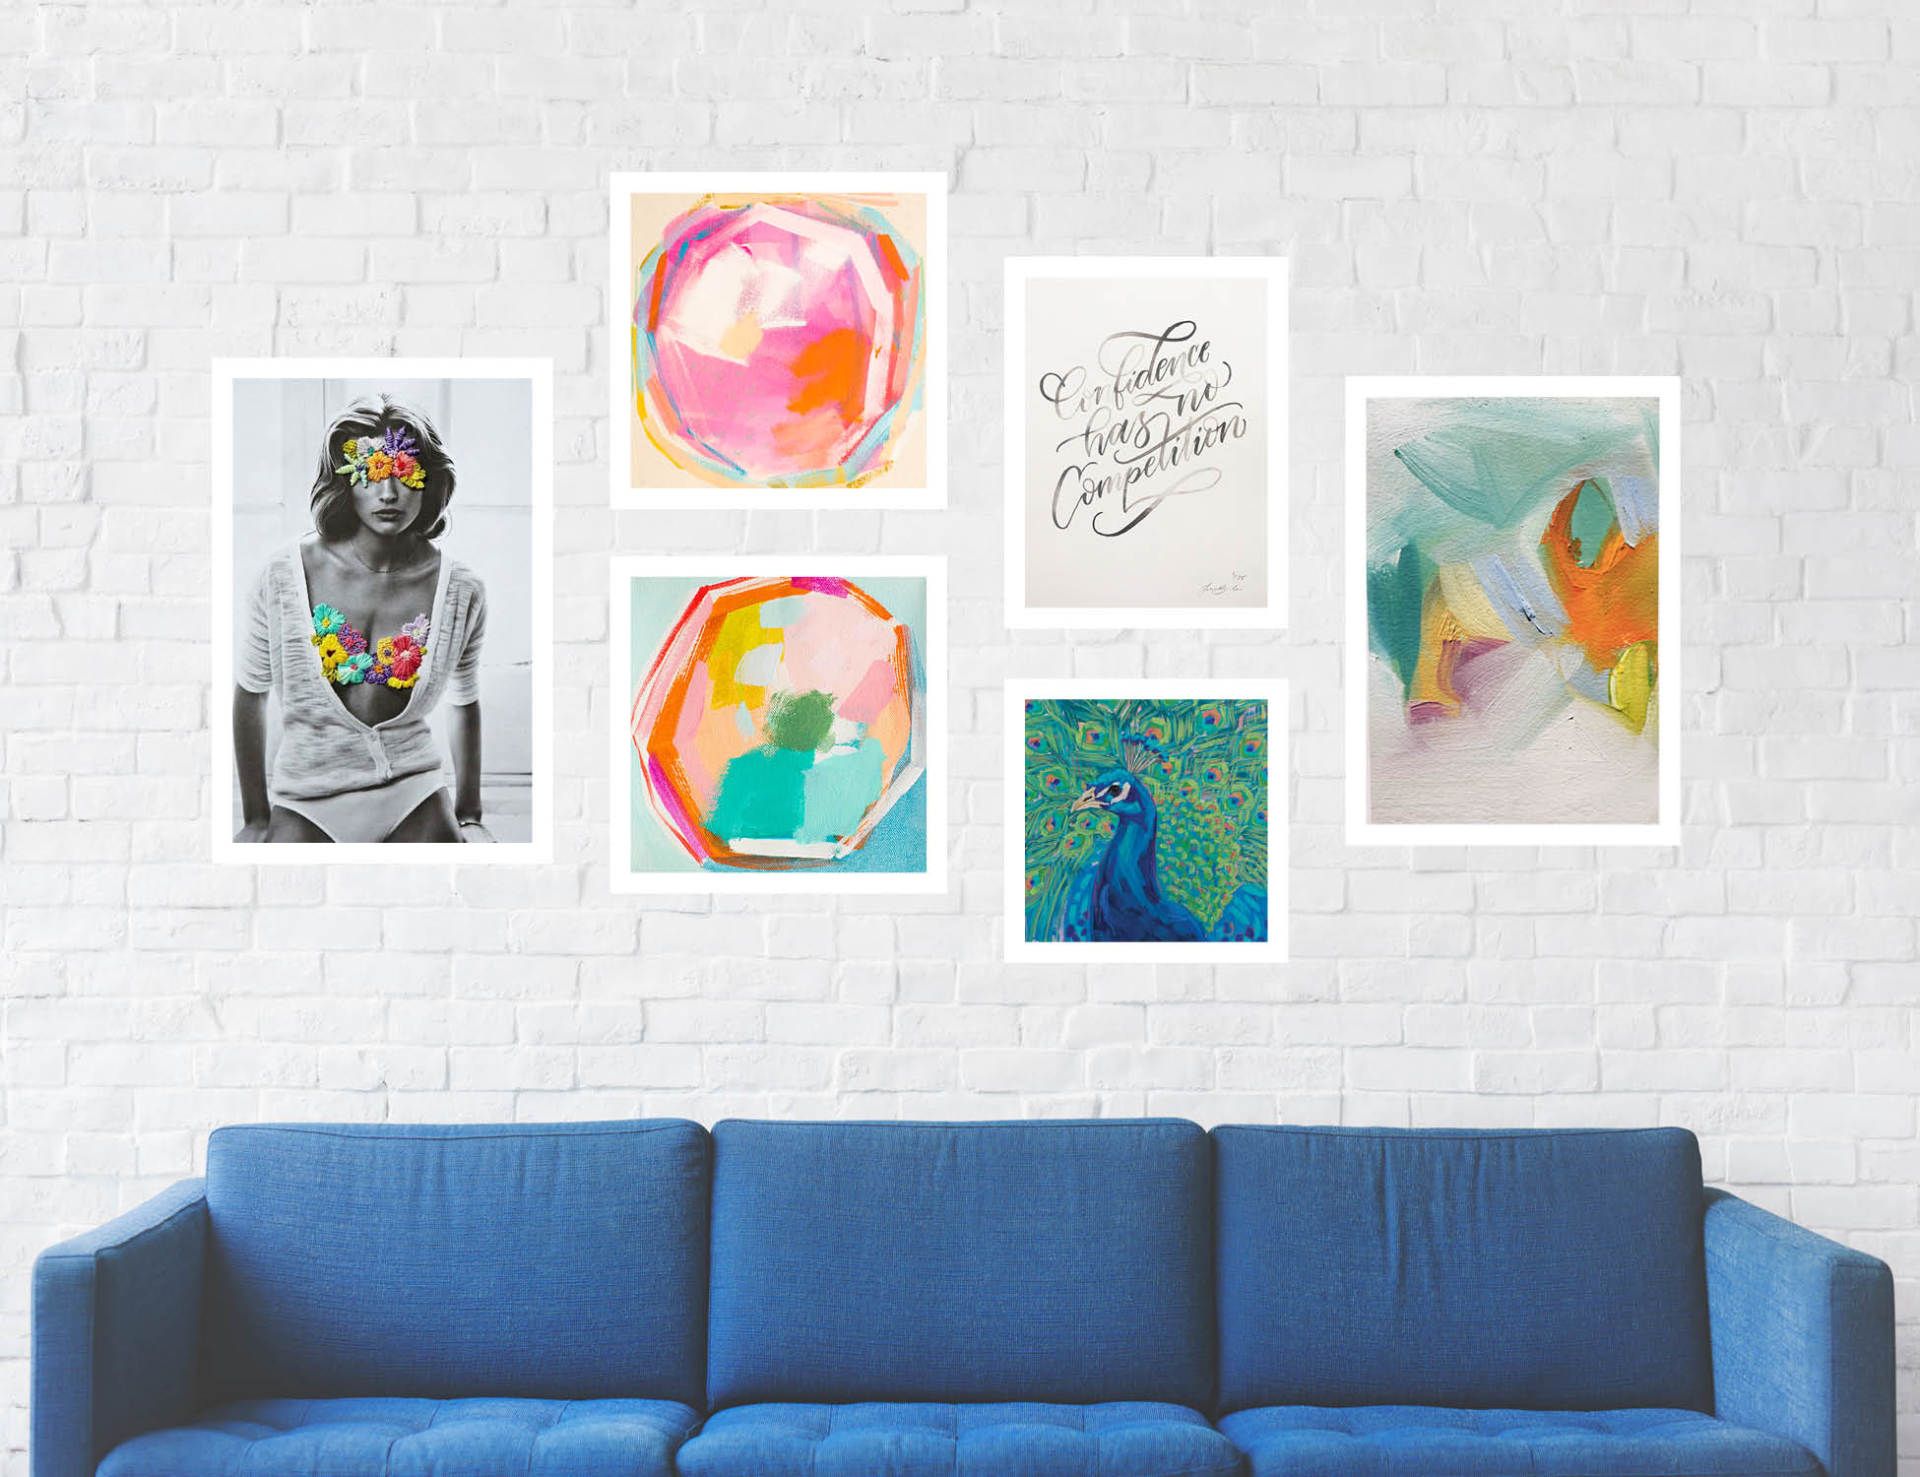 Gallery wall package #1